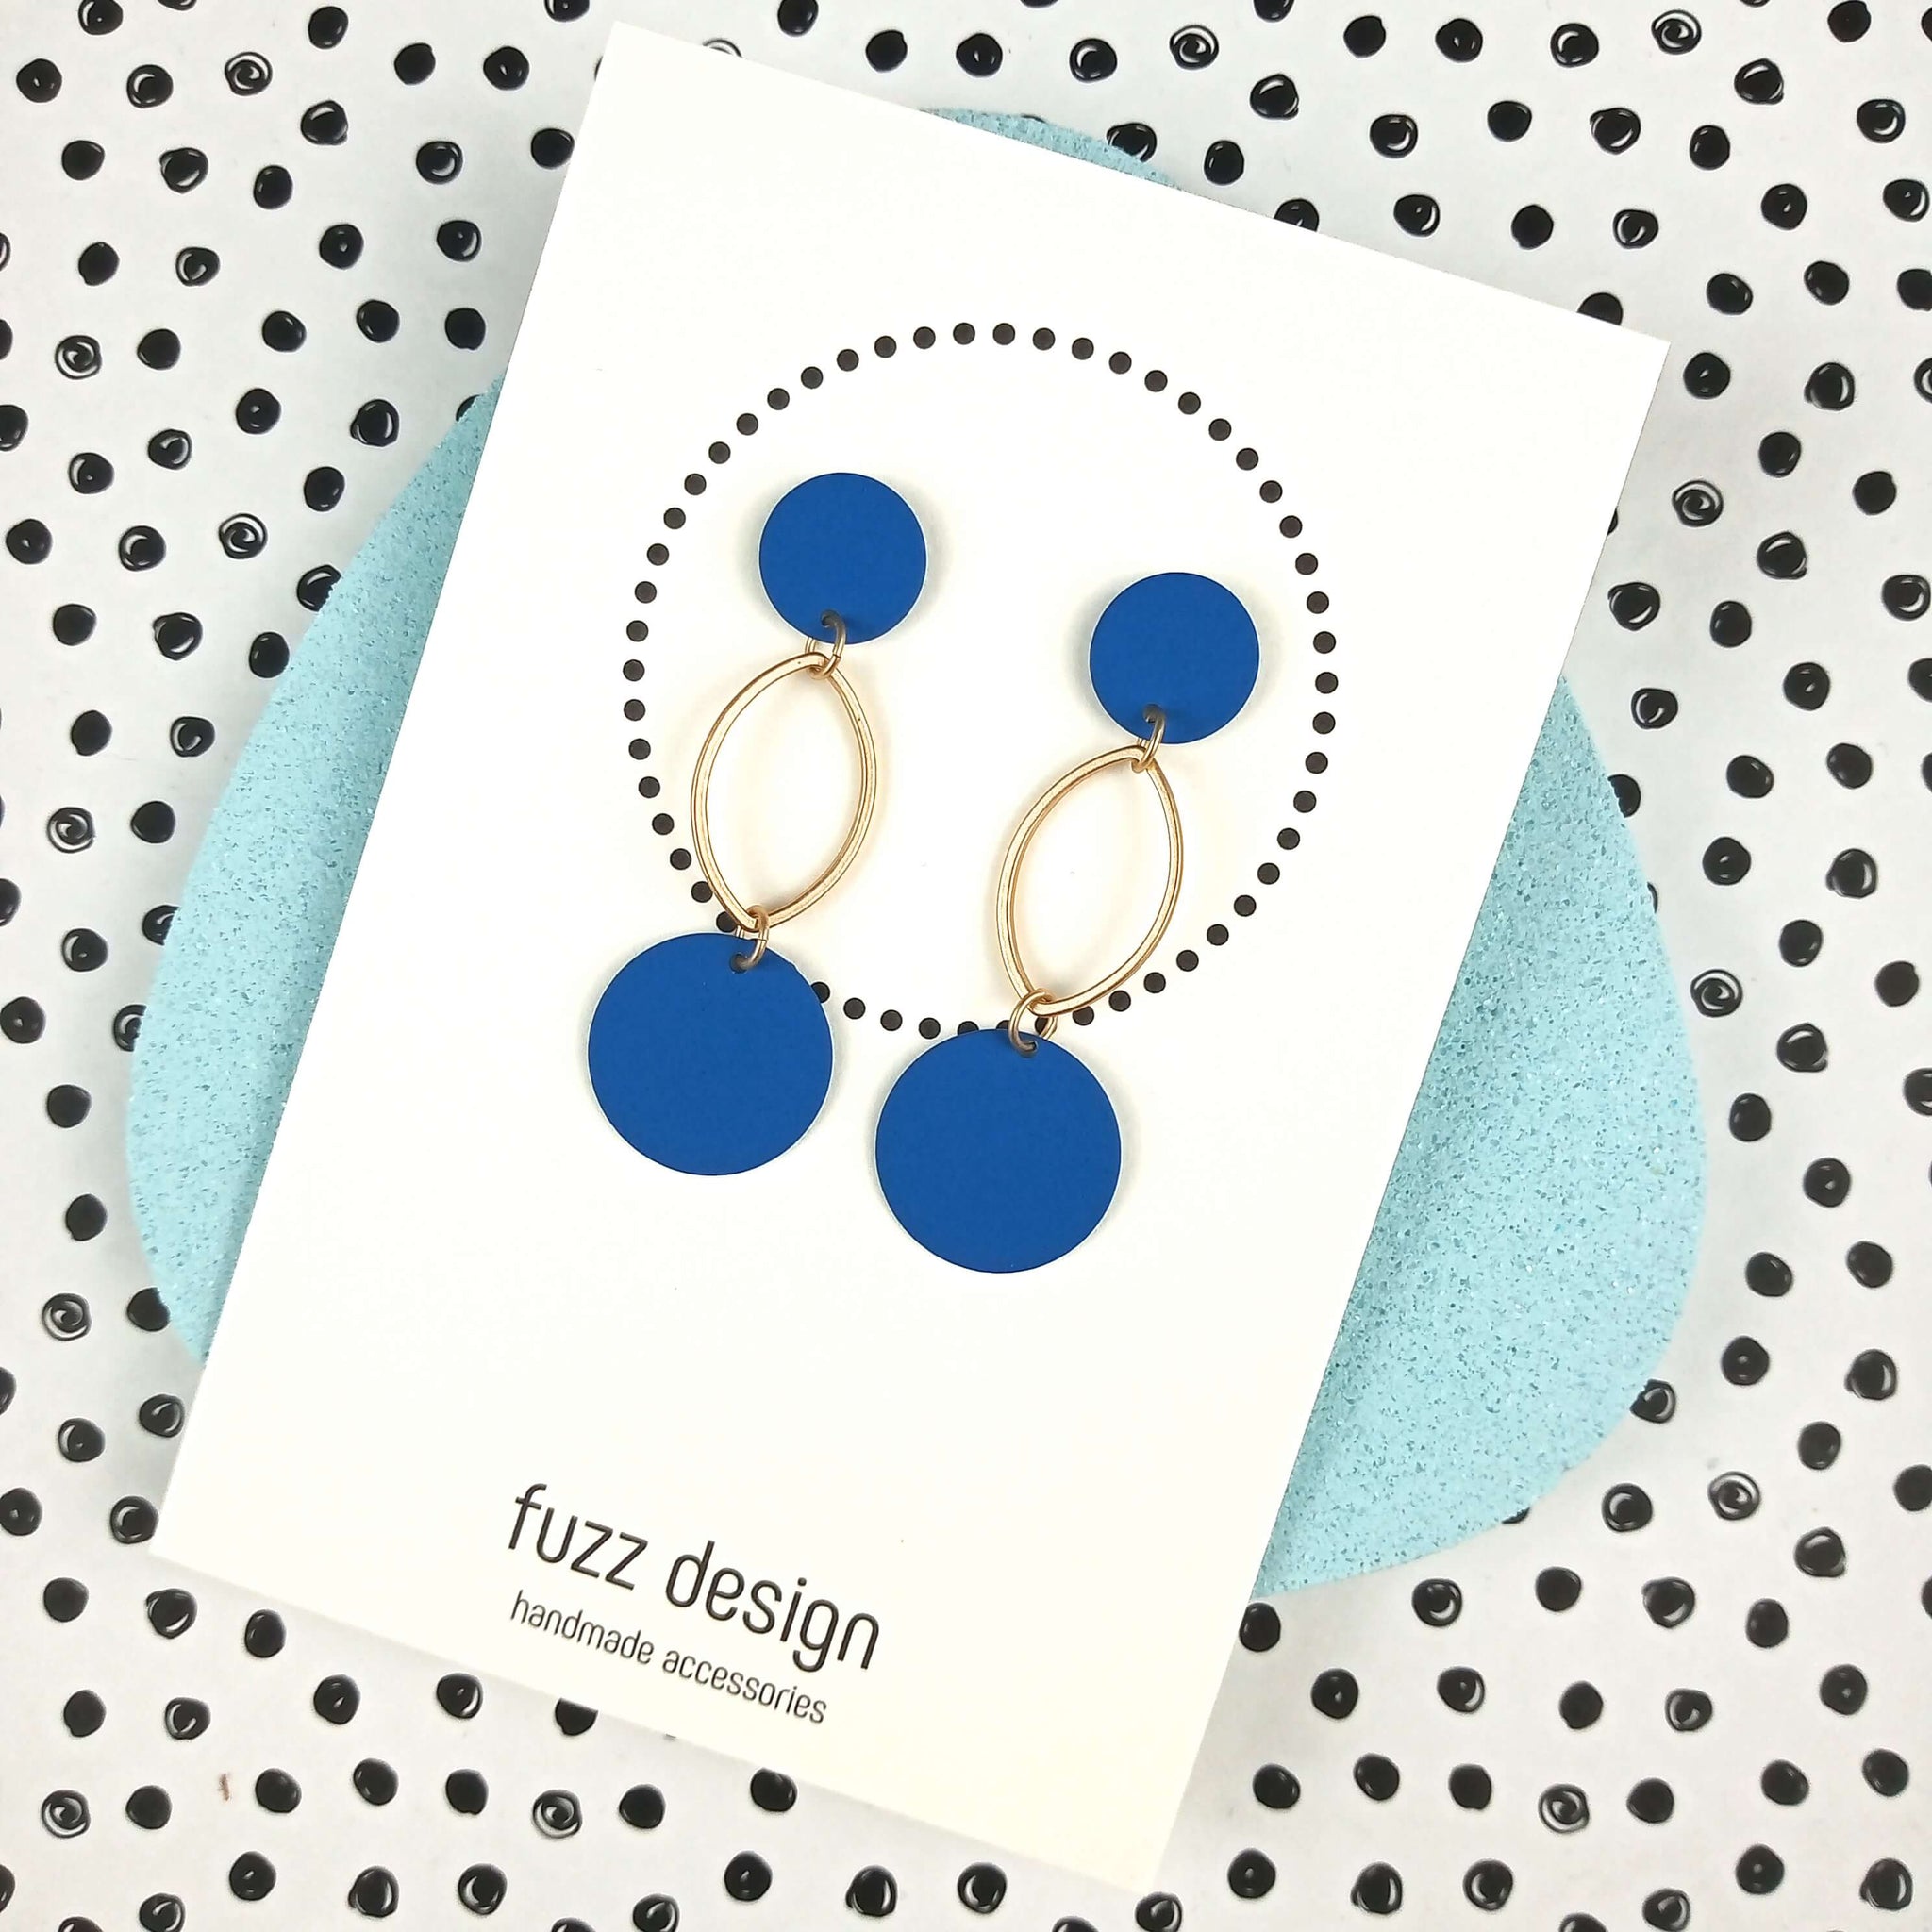 Total Ellipse Of The Heart | Royal Blue & Gold